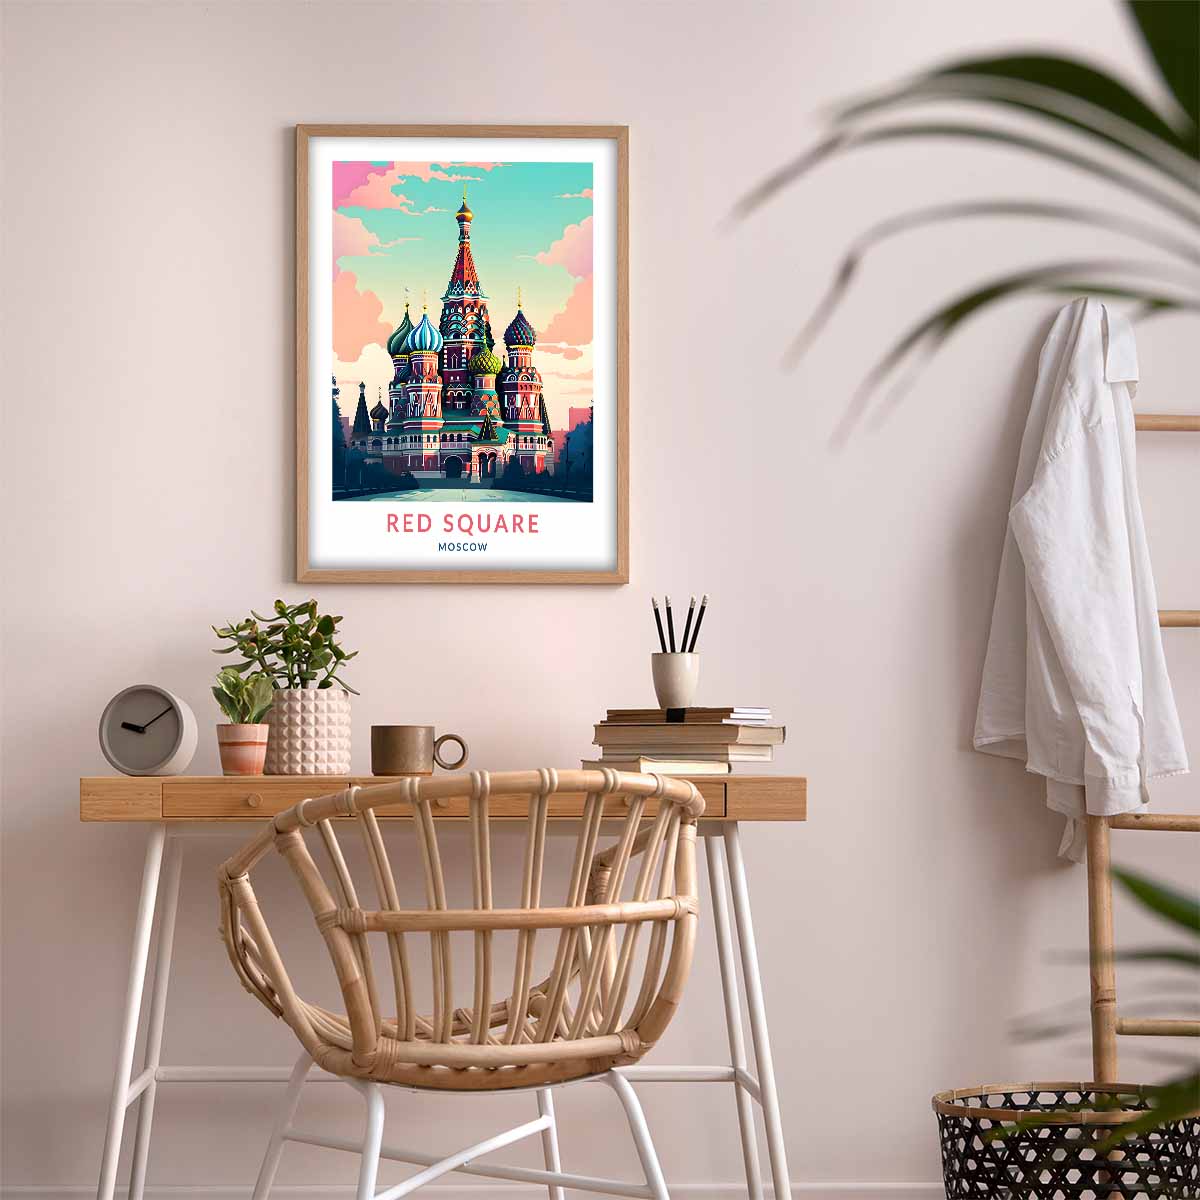 Red Square Moscow Travel Poster - Wall Art for Home Décor